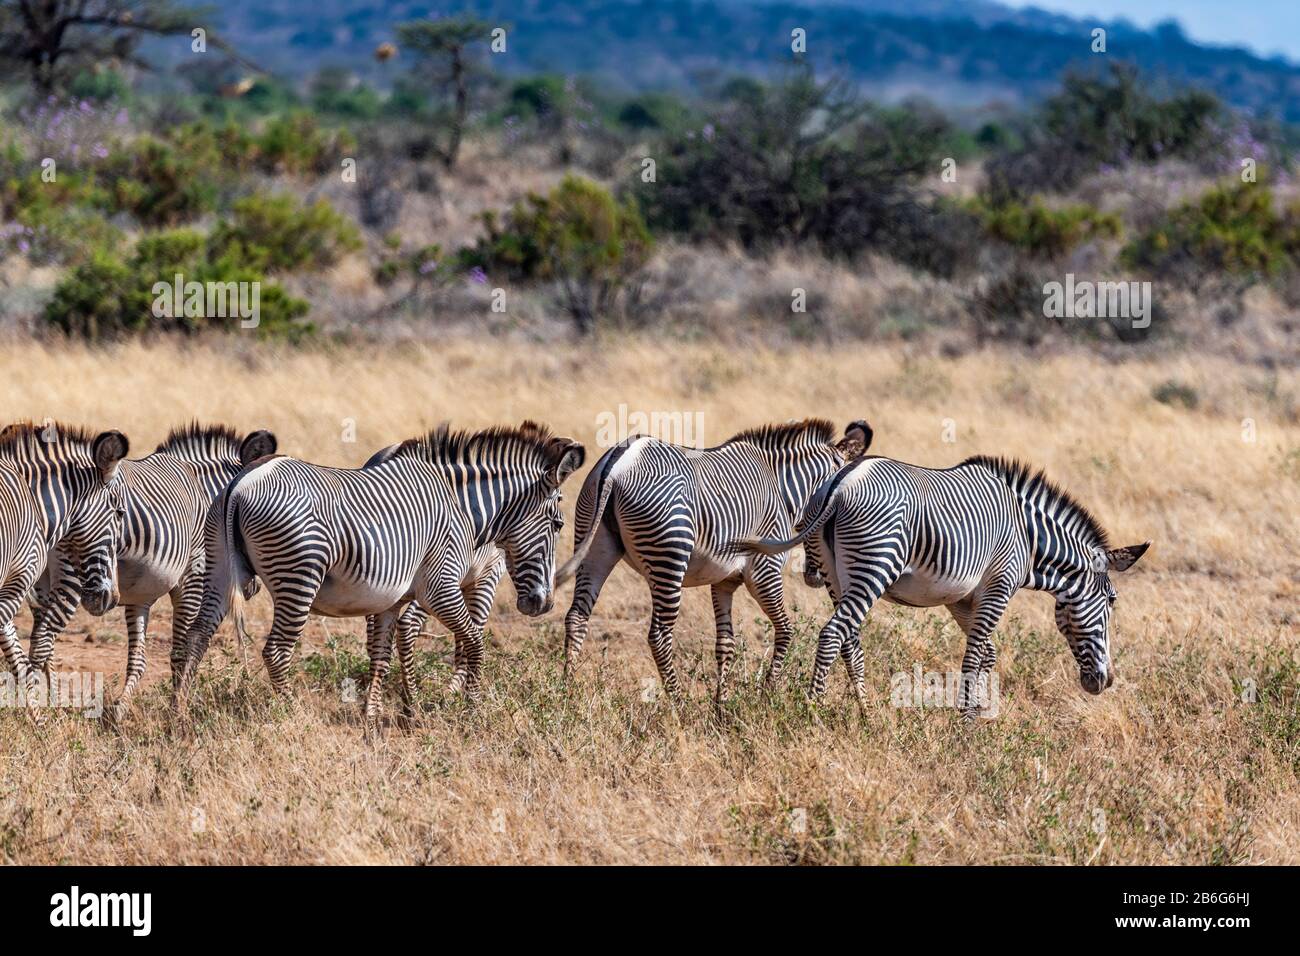 Rare Grévy's Zebra, an endangered species is the largest of all wild equines. Lives in semi-arid grassland, Kenya and Ethiopia. Stock Photo